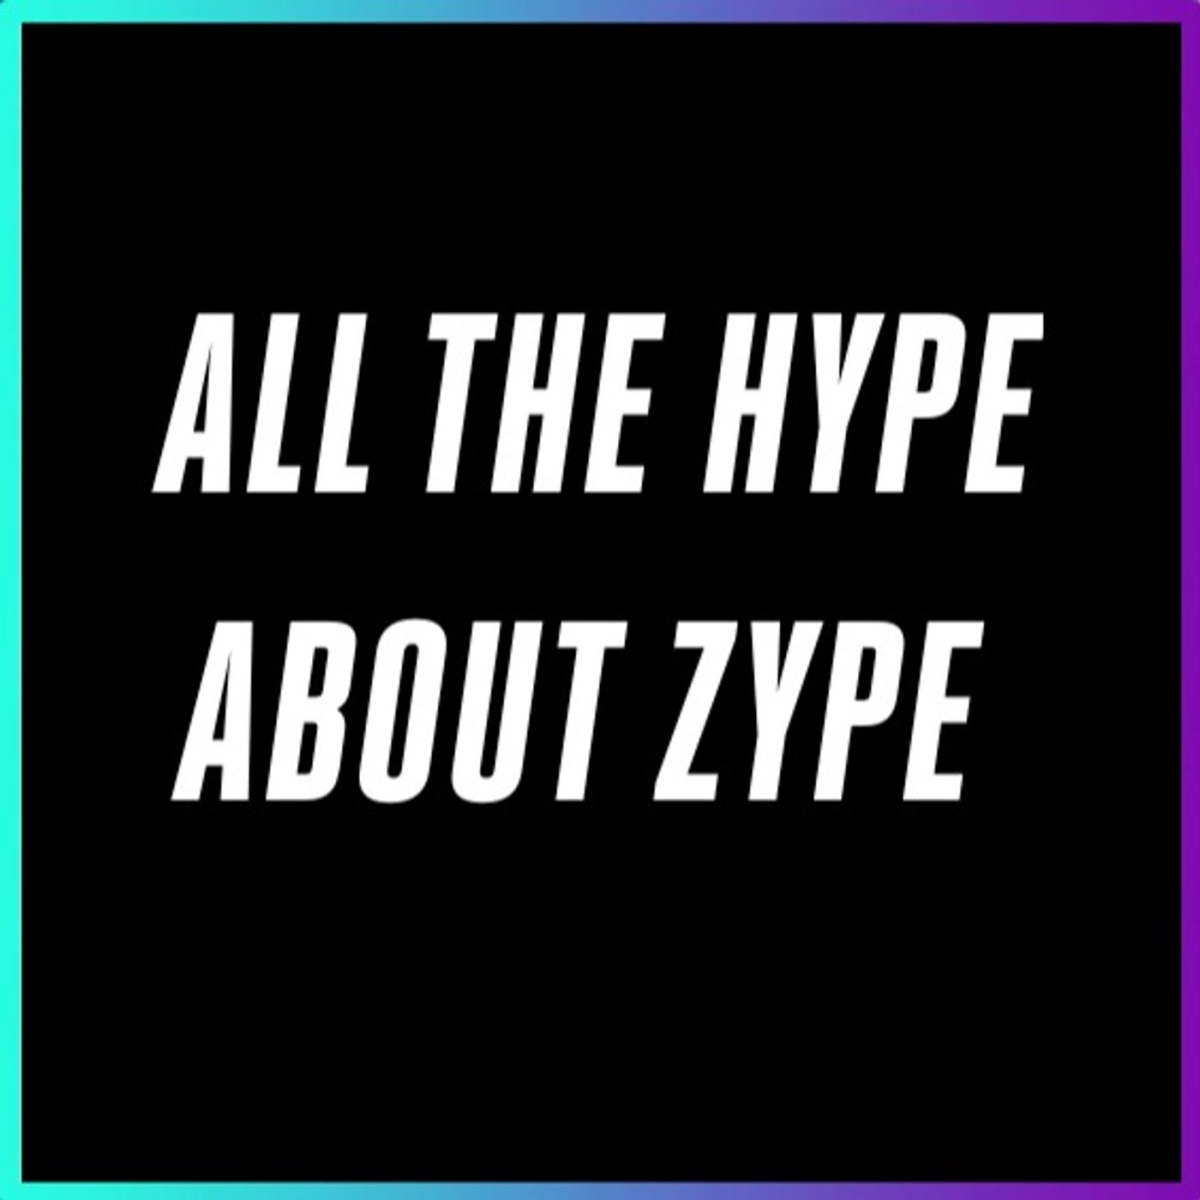 "All the Hype about Zype" - The Video Insiders Podcast